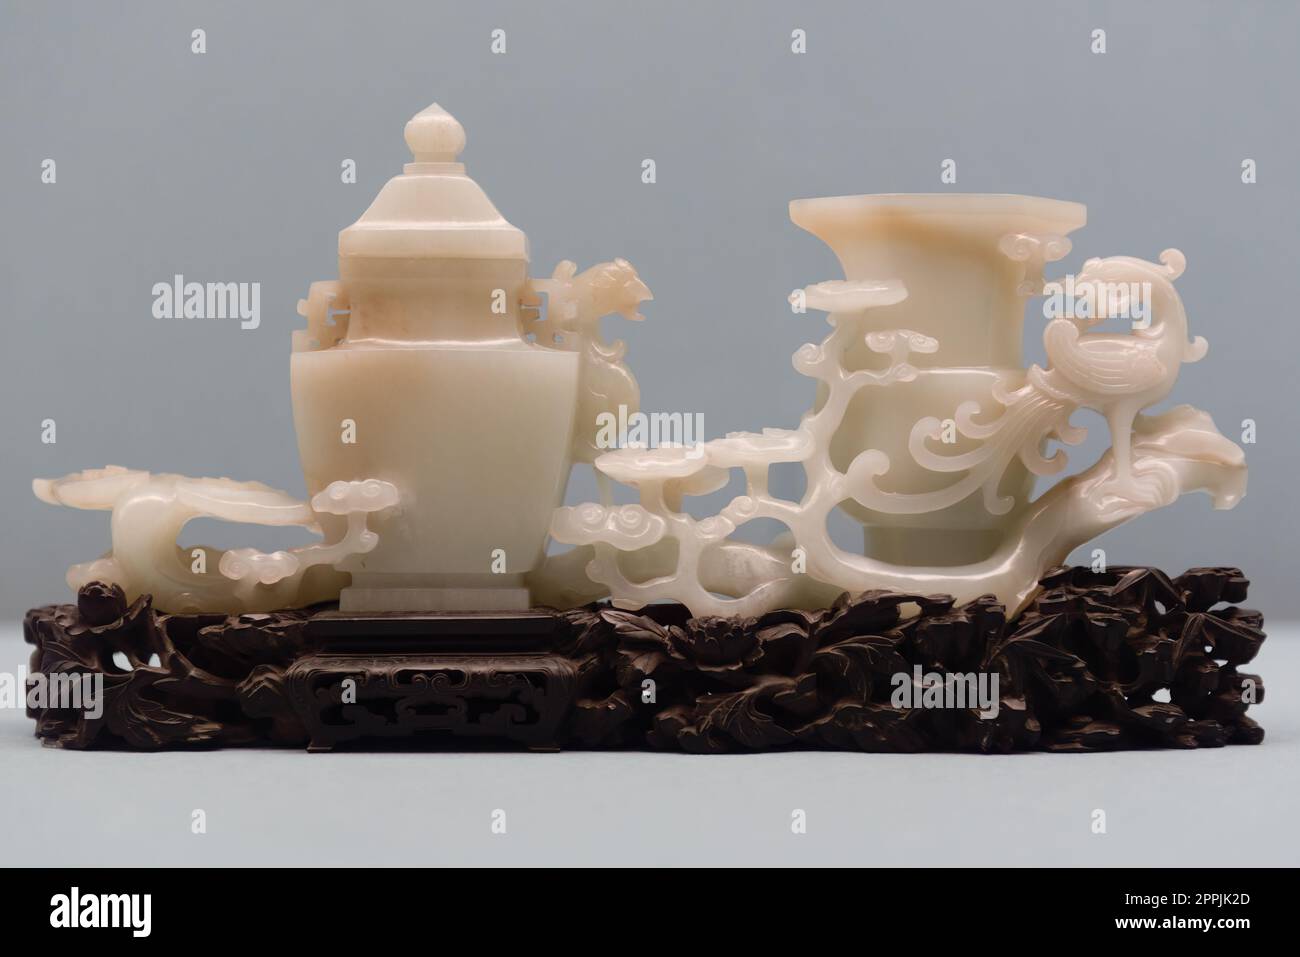 An ancient Chinese imperial artifact at The National Palace Museum in Taiwan. Stock Photo